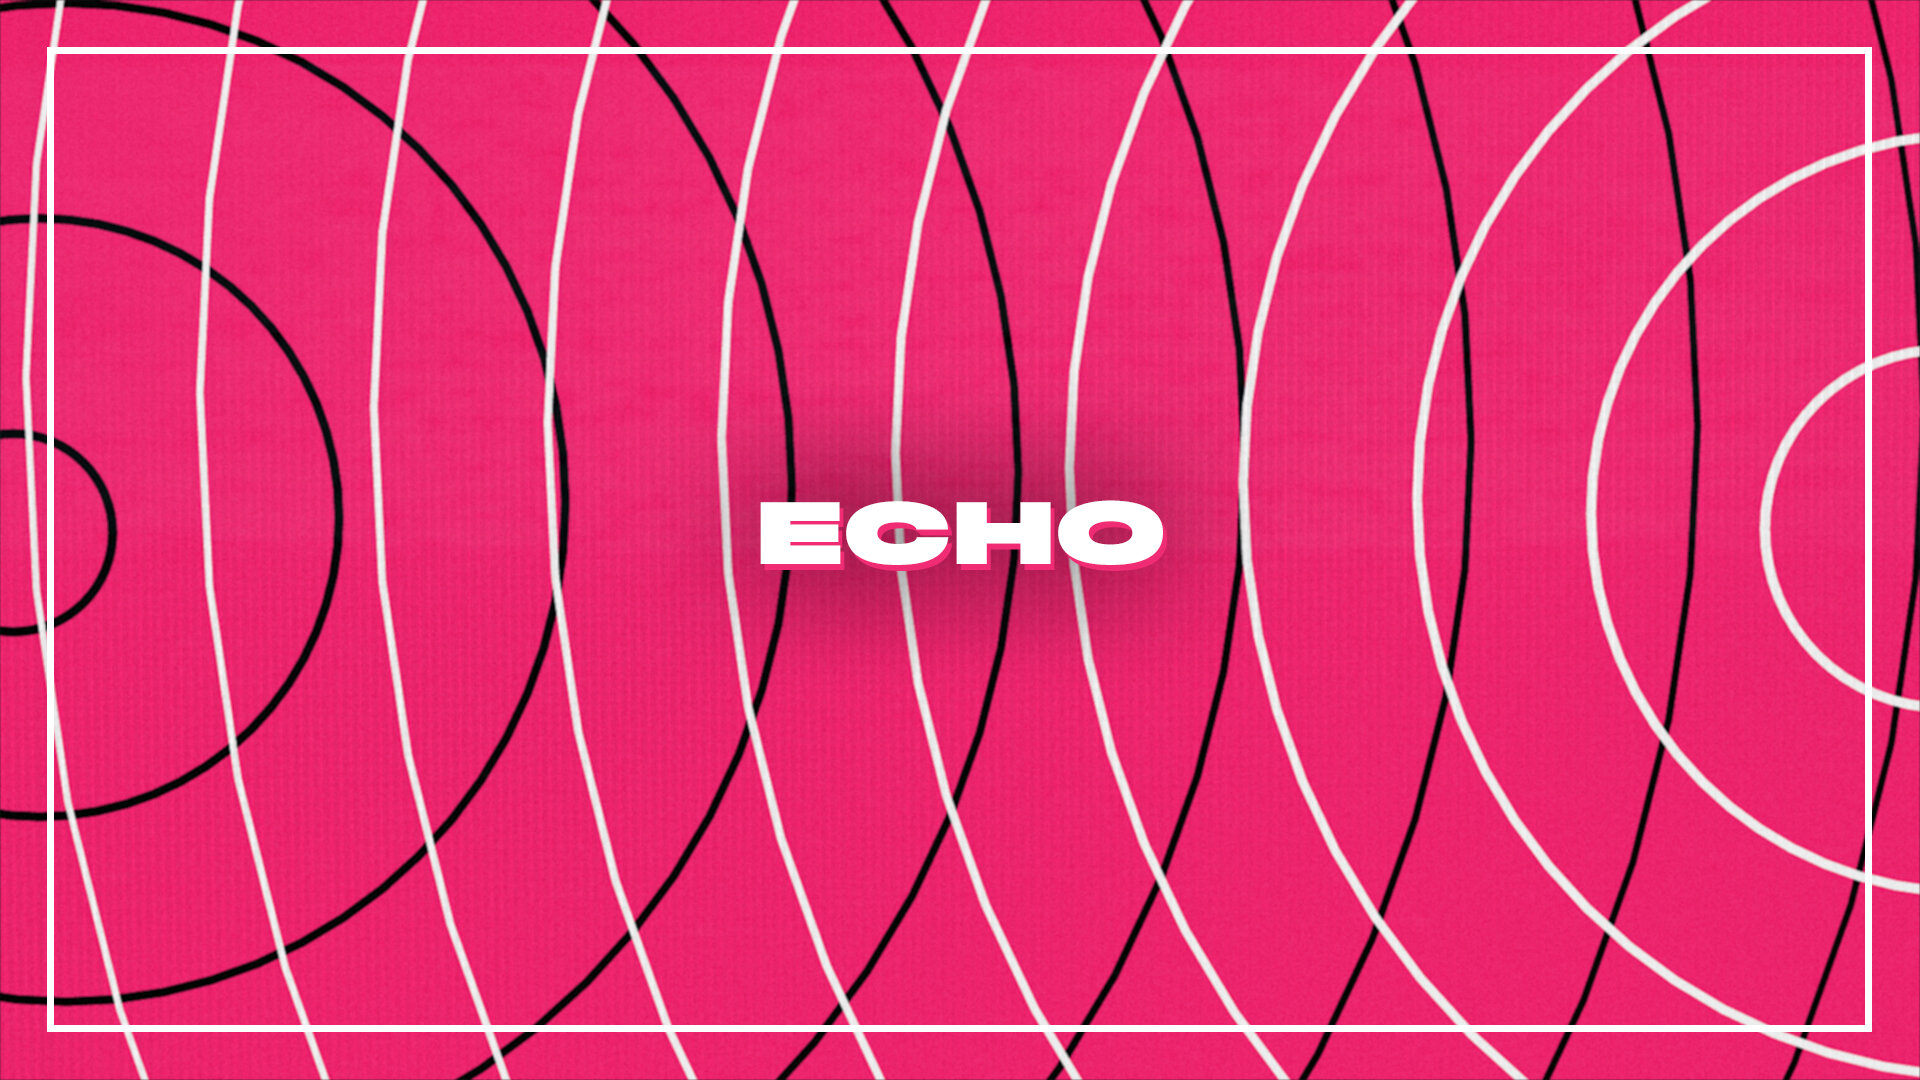 SeeingSounds_Echo_Poster2.jpg